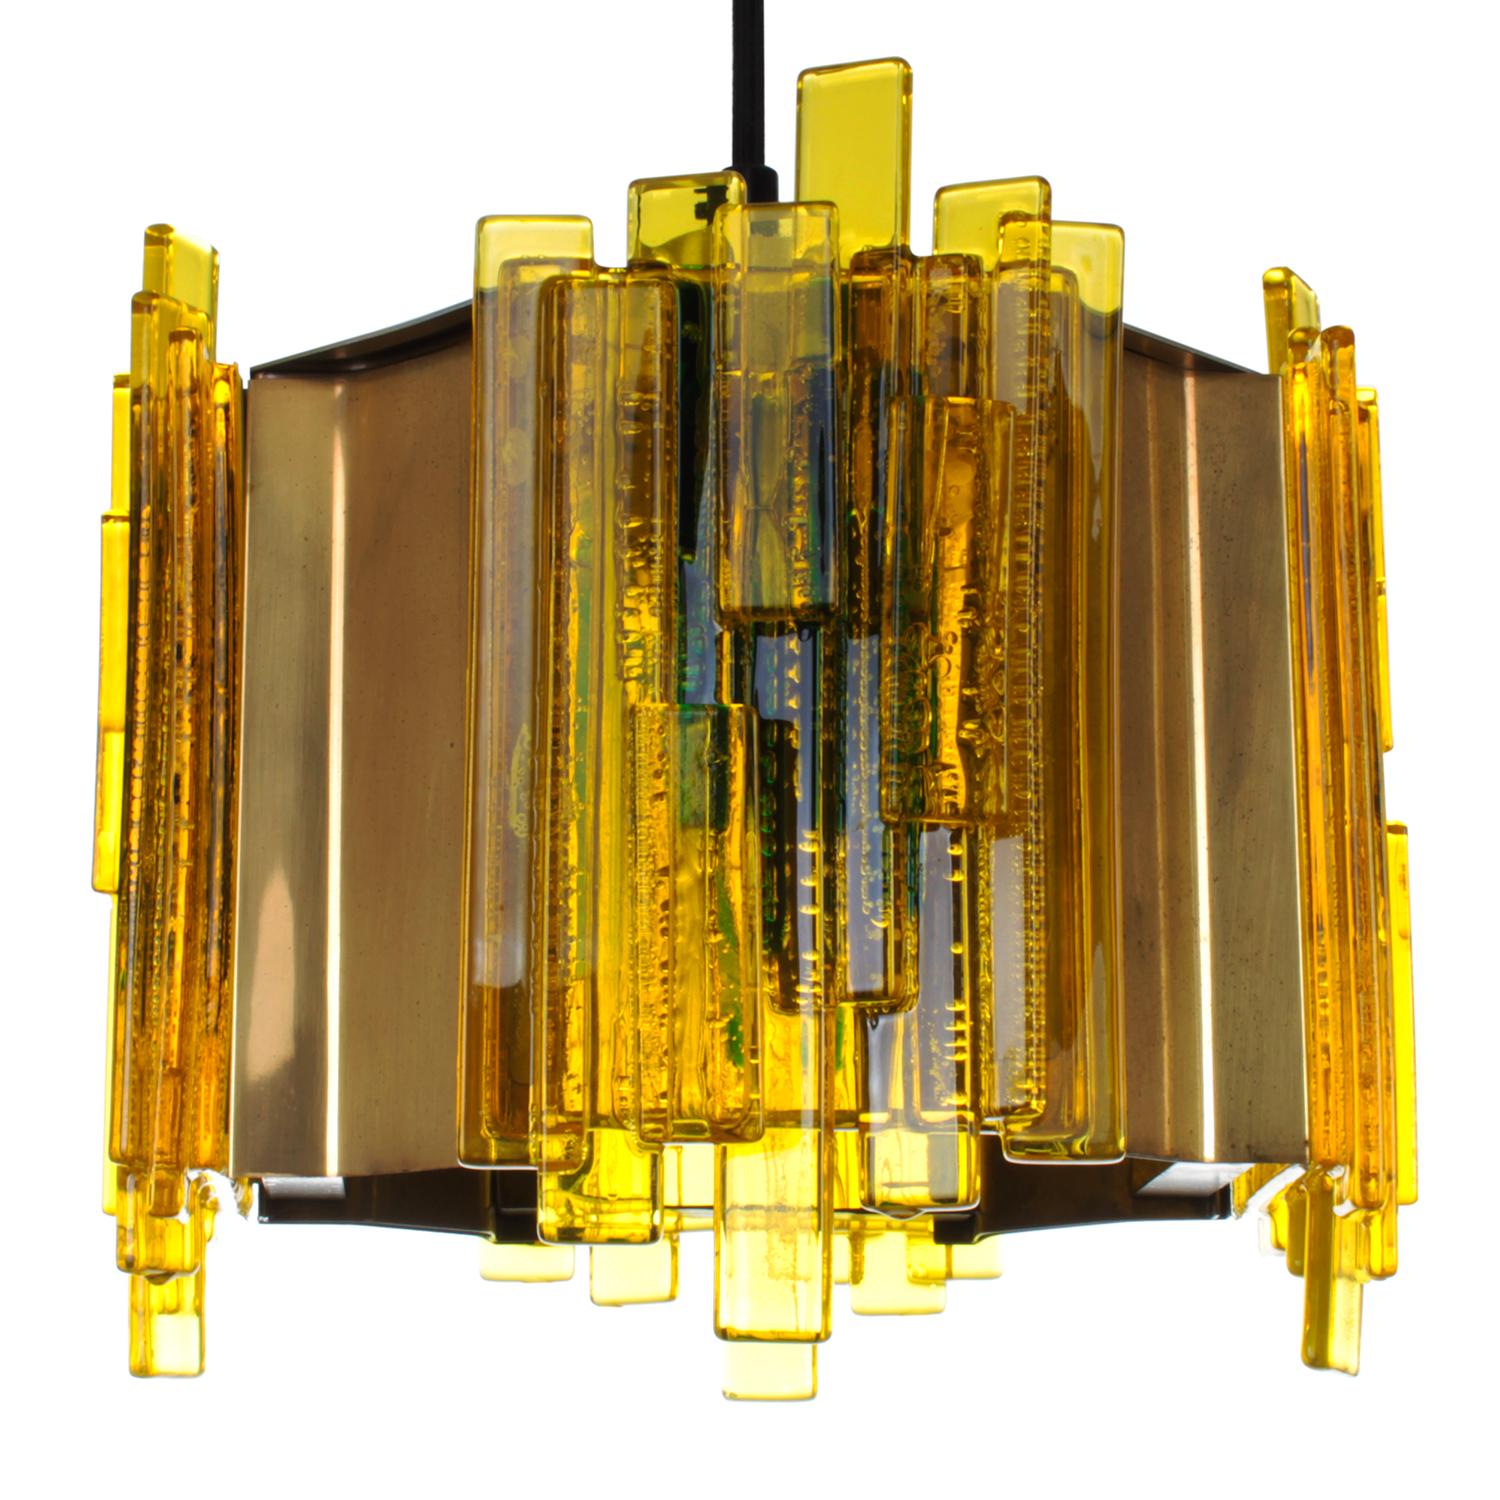 Danish Yellow Plexiglas Pendant by Claus Bolby for Cebo Industri in the 1970s